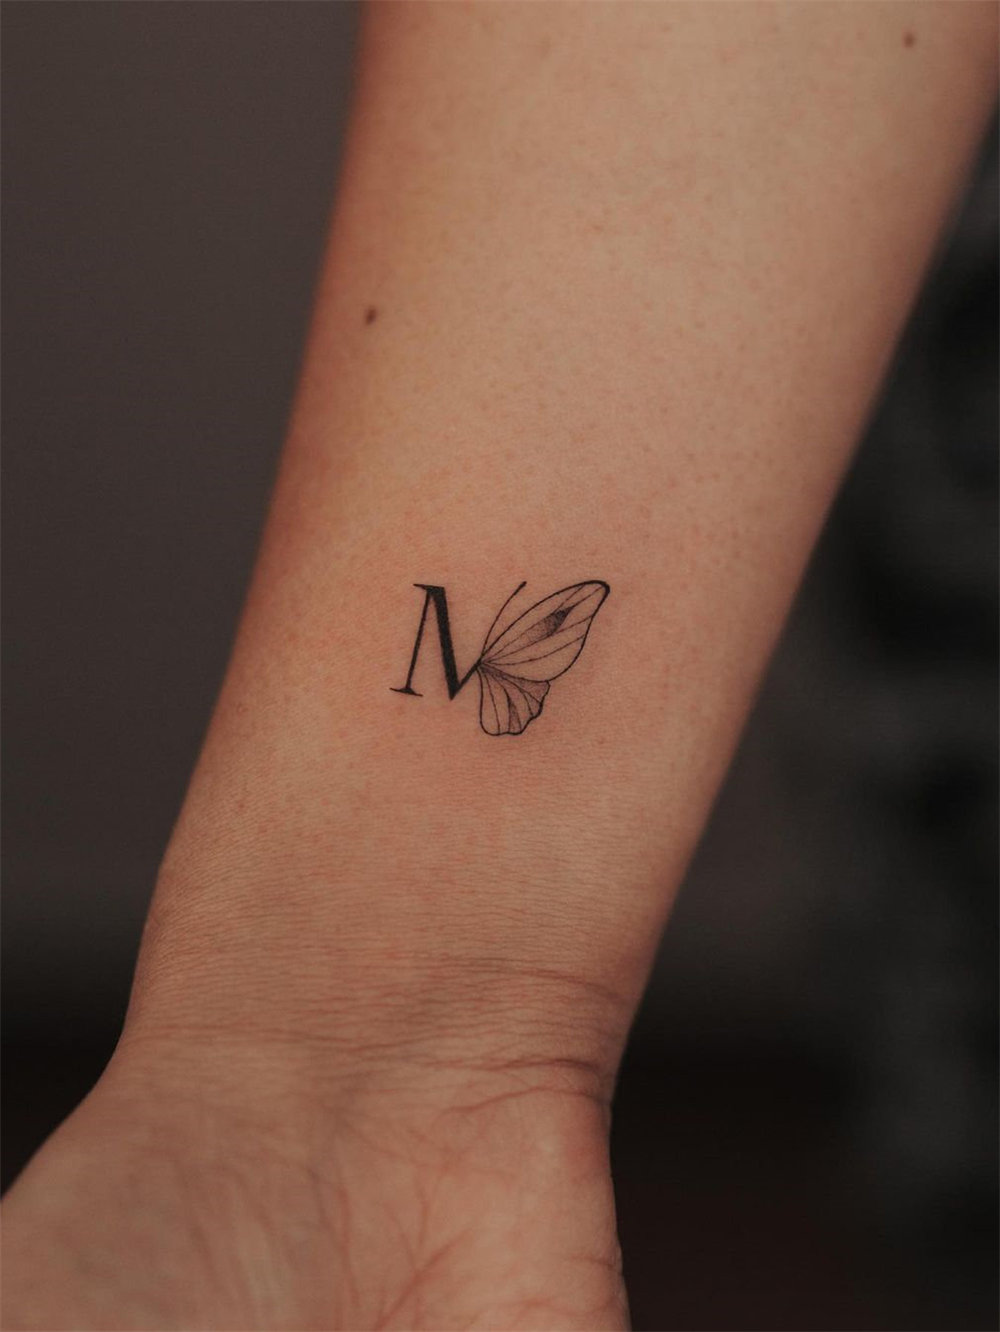 30 Simple and Small Tattoos Ideas for Women